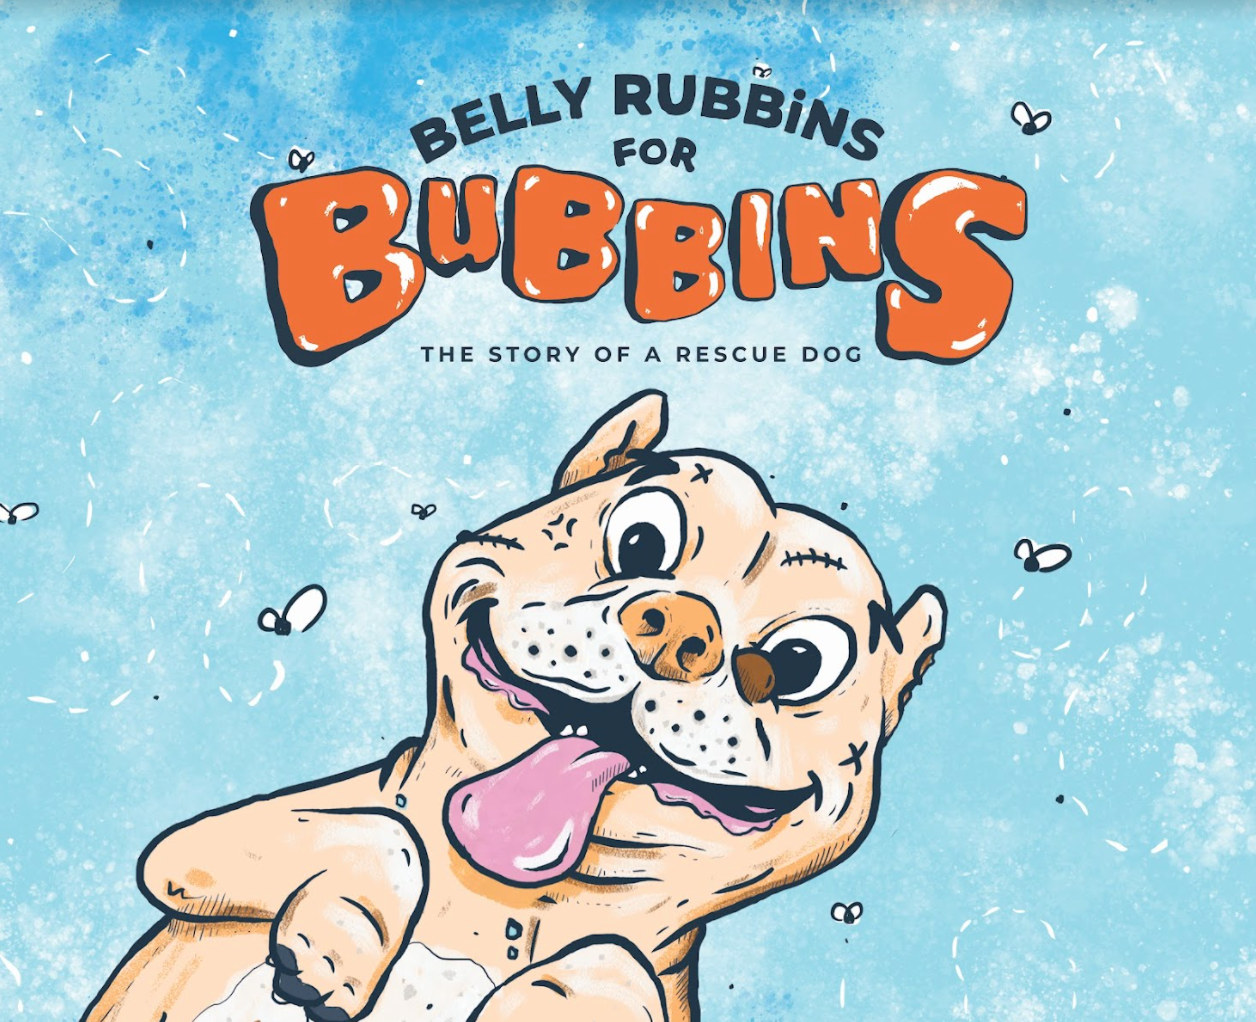 Load video: Official: Belly Rubbins For Bubbins - The Story of a Rescue Dog